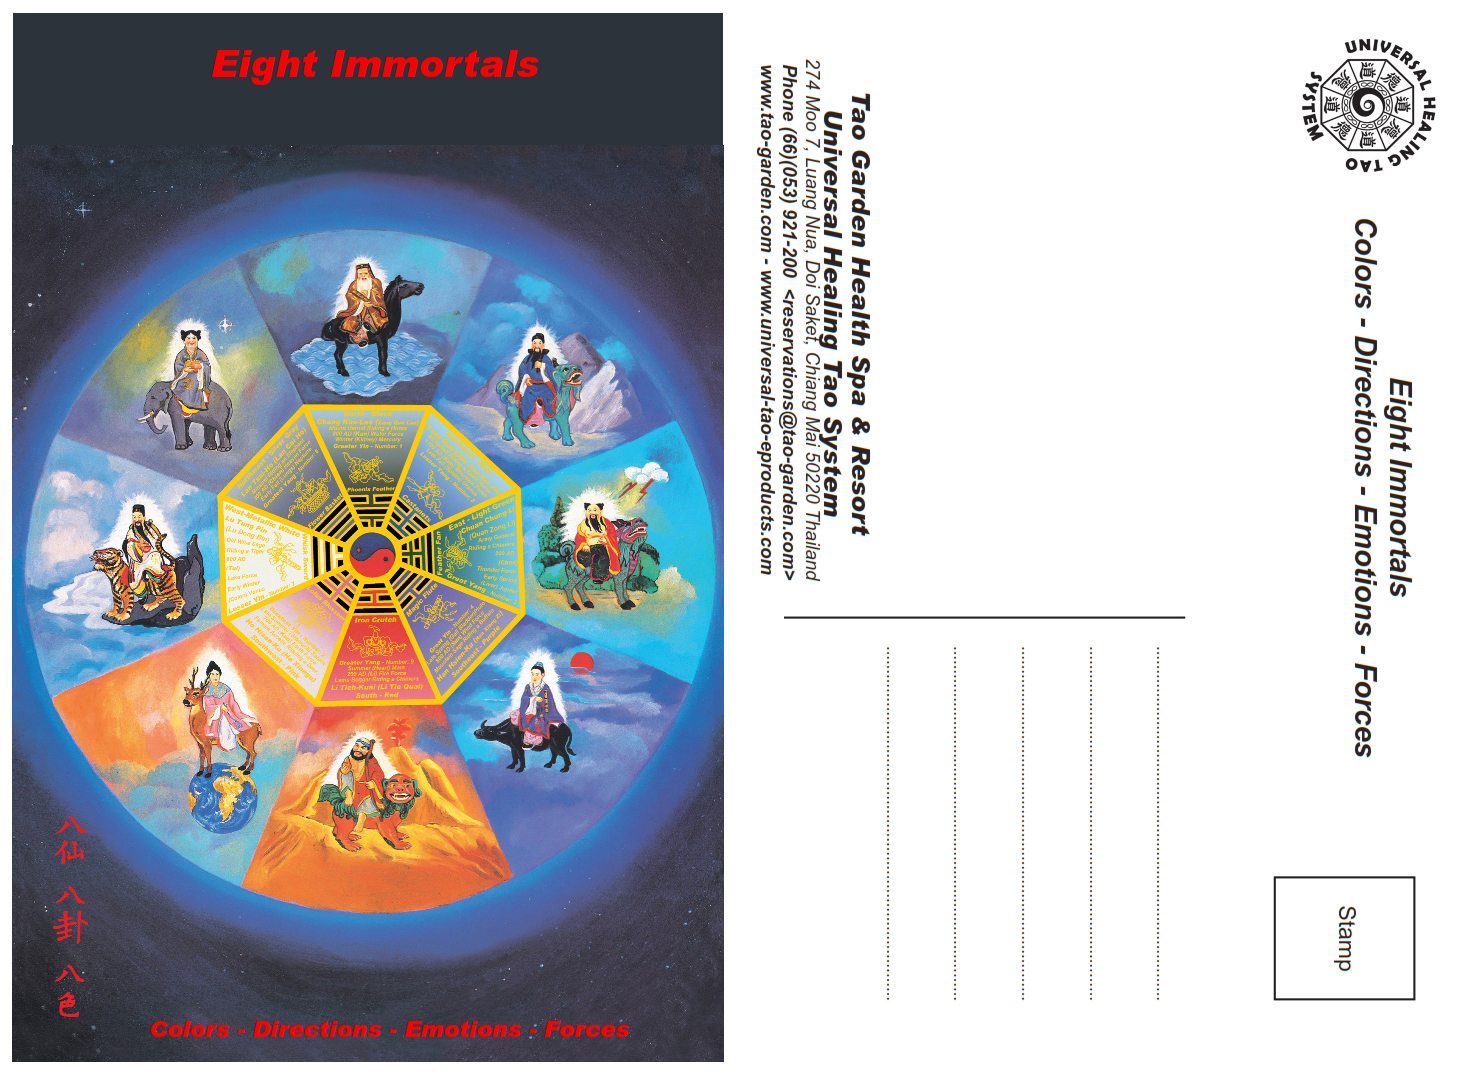 Eight Immortal Forces (E-Post Card) [DL-PC09]